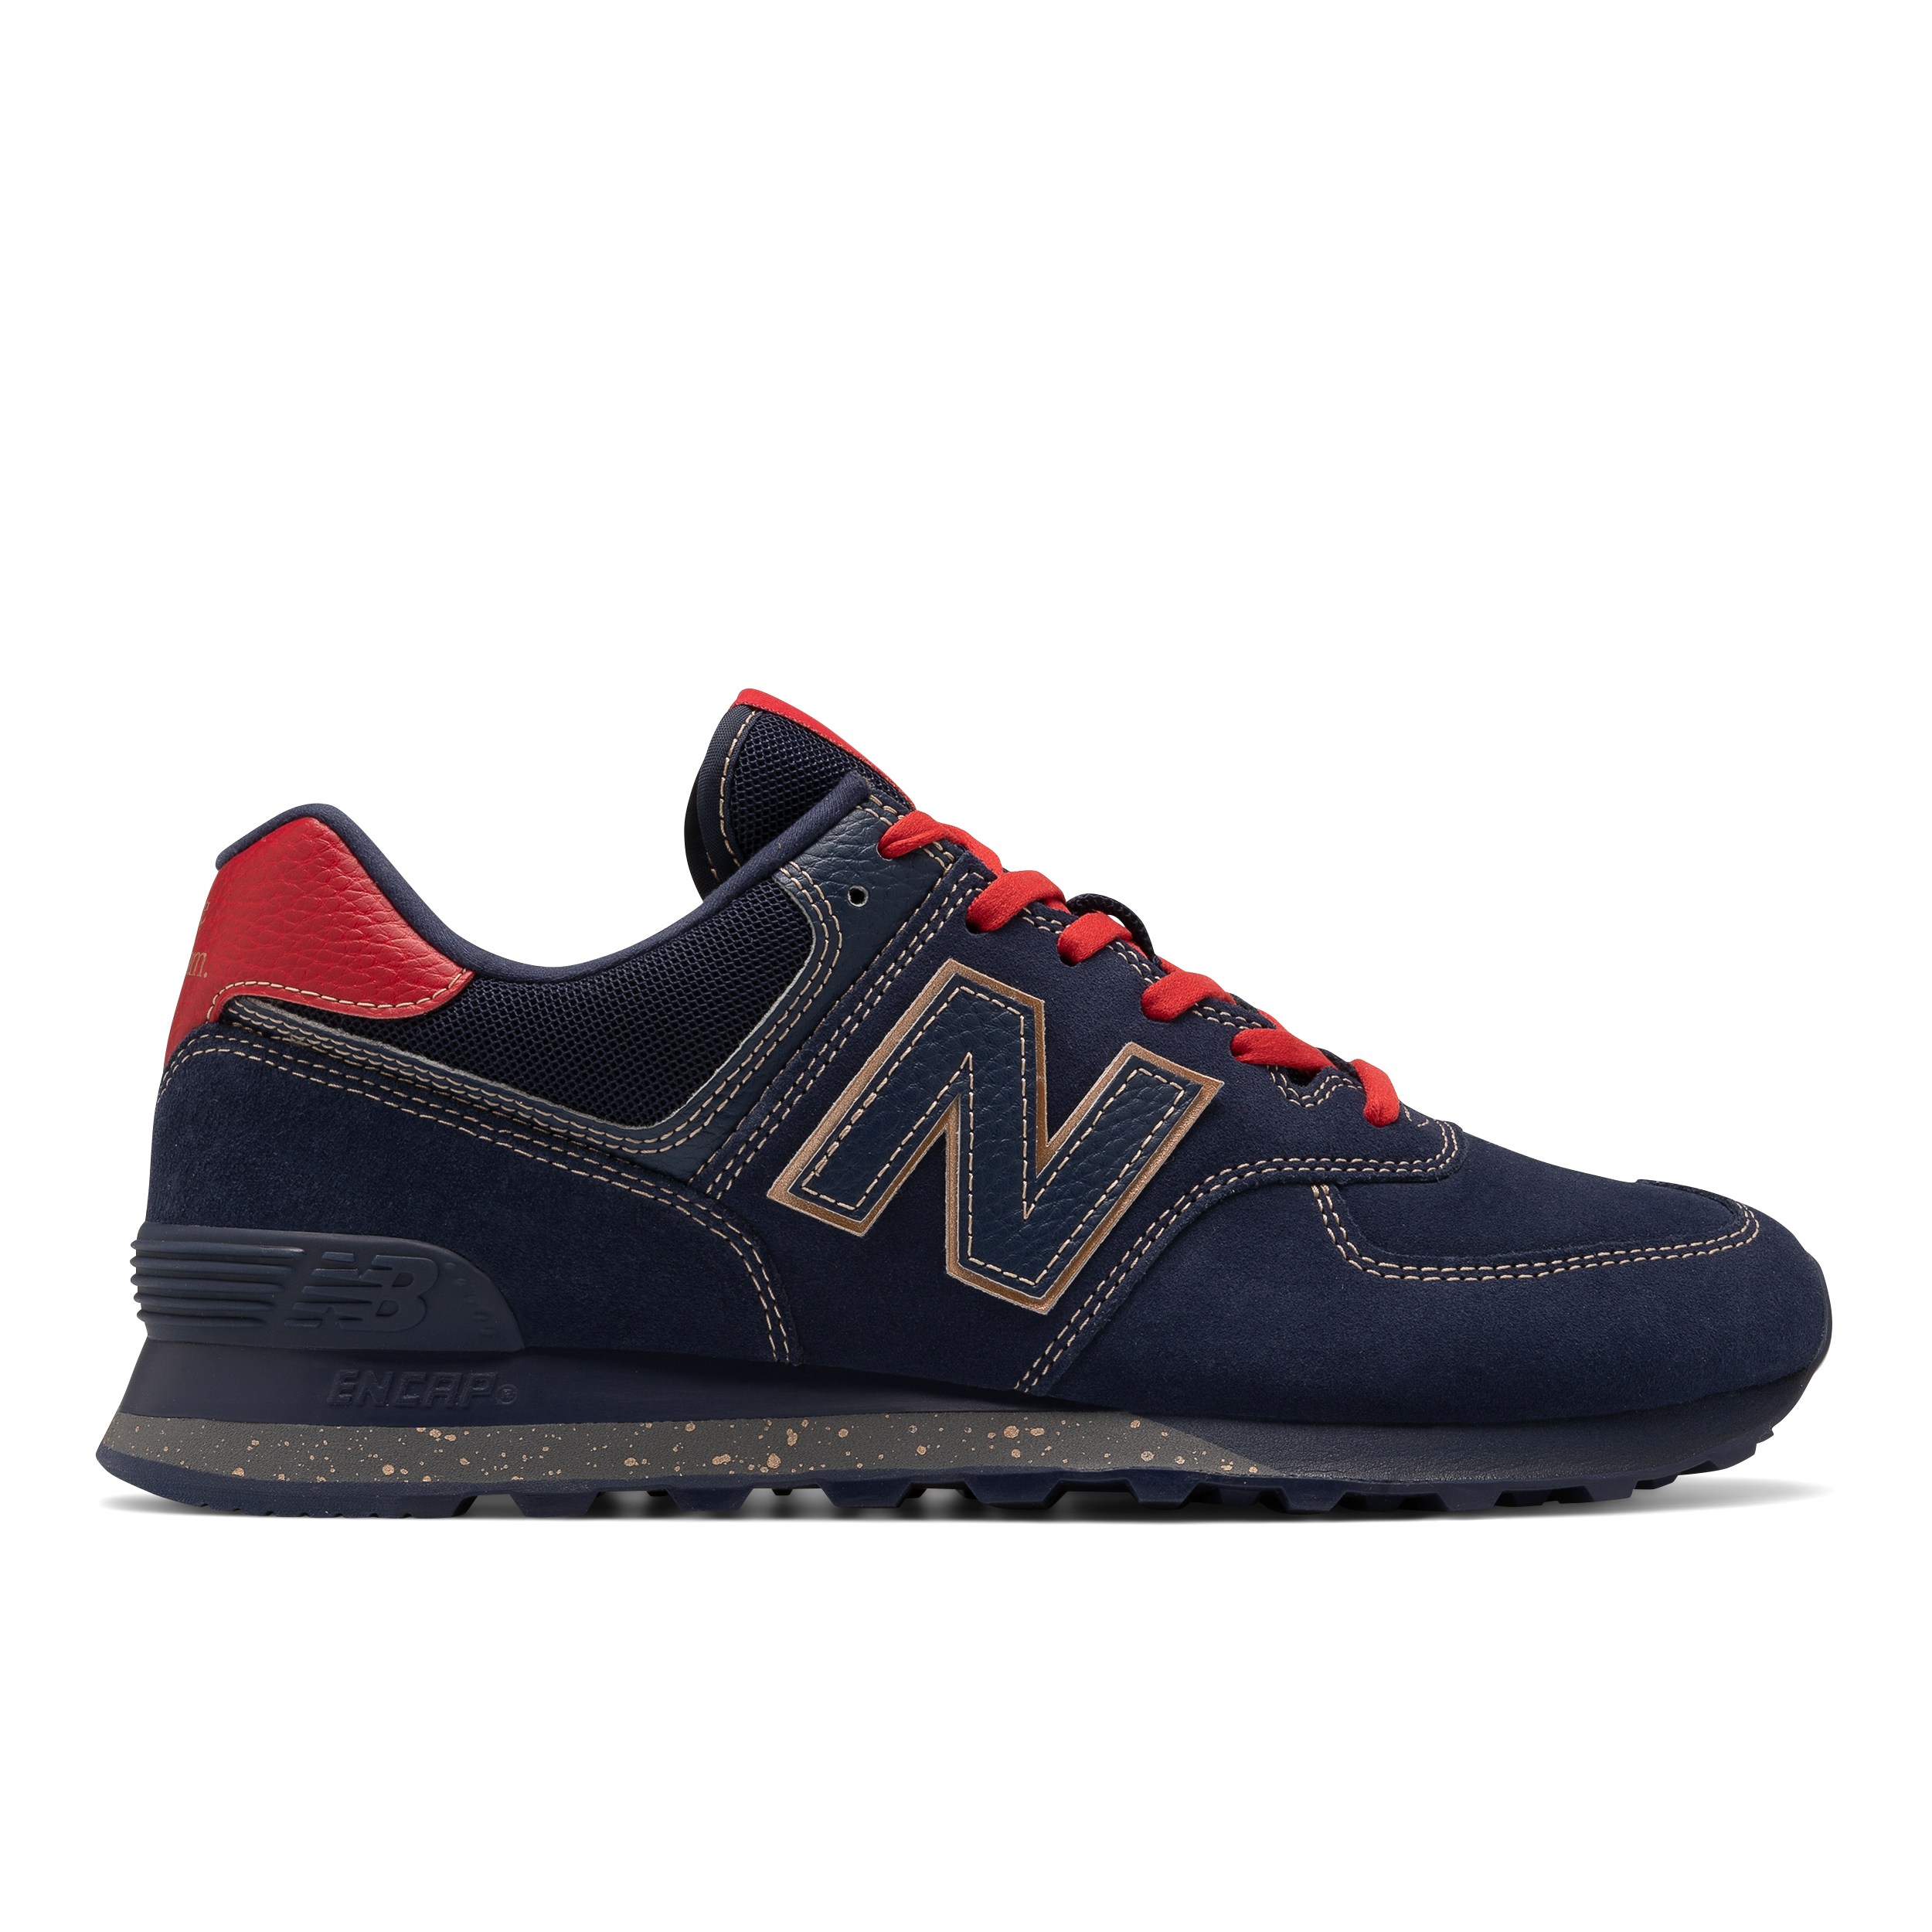 New Balance Launches The 850 Along With The Heritage And Inspire The ...